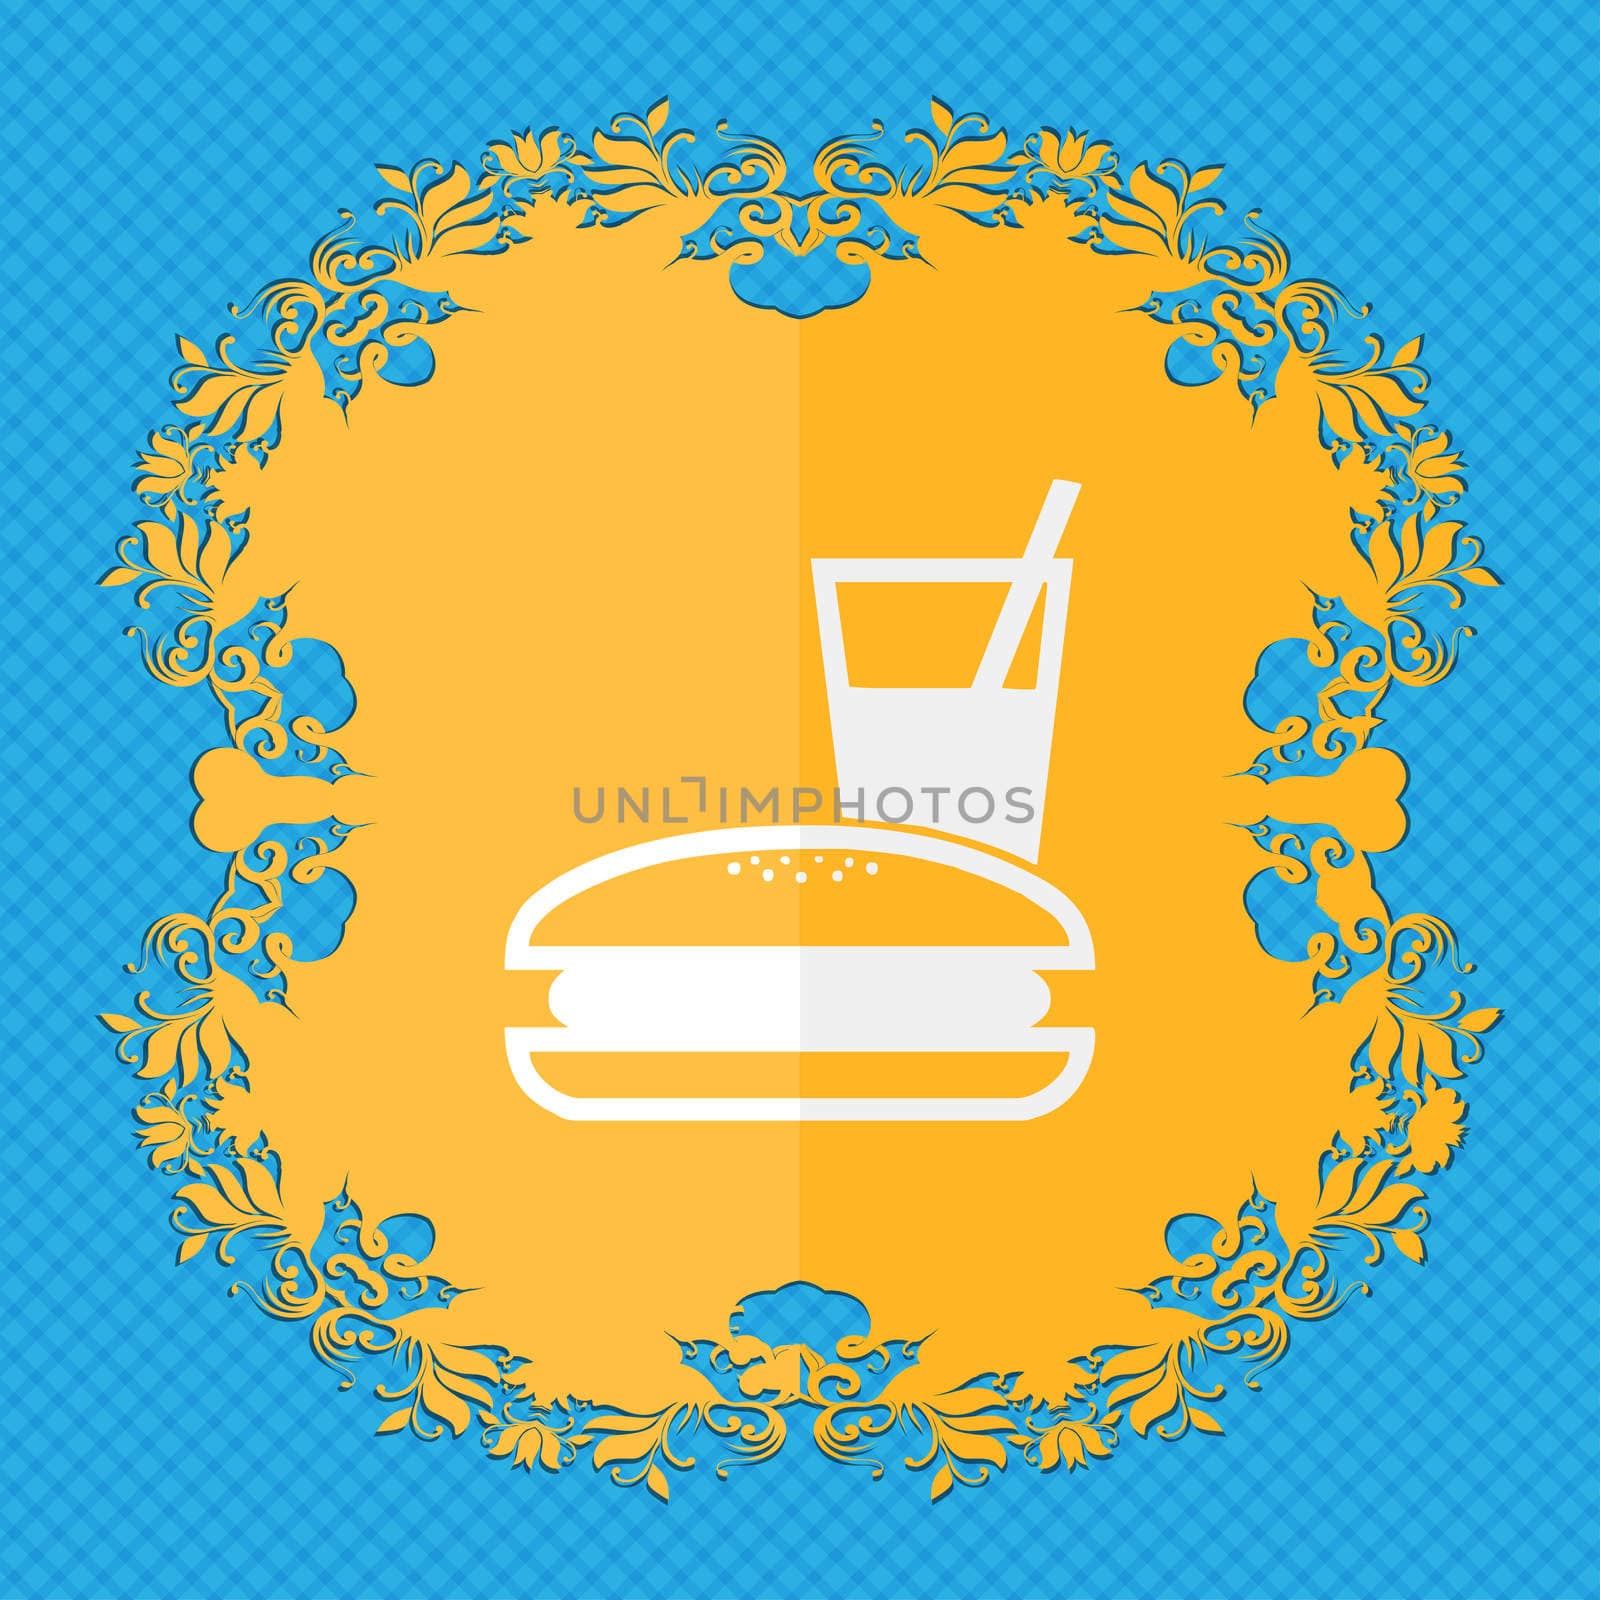 lunch box. Floral flat design on a blue abstract background with place for your text. illustration